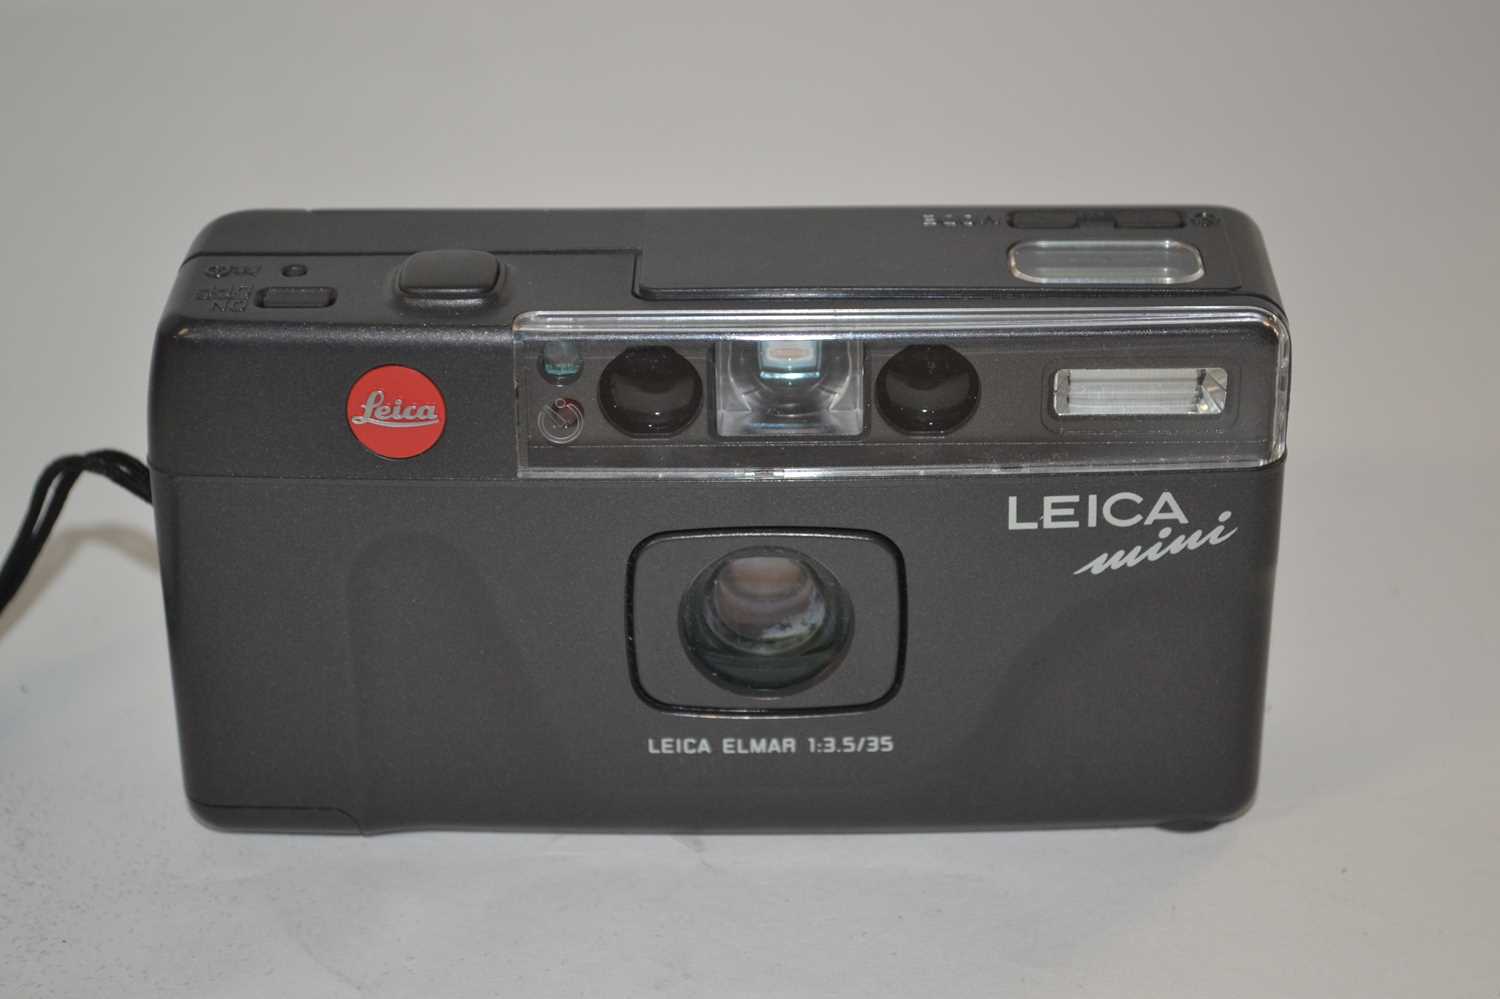 Camera and Photography Interest - A Leica mini camera and instructions - Image 2 of 3